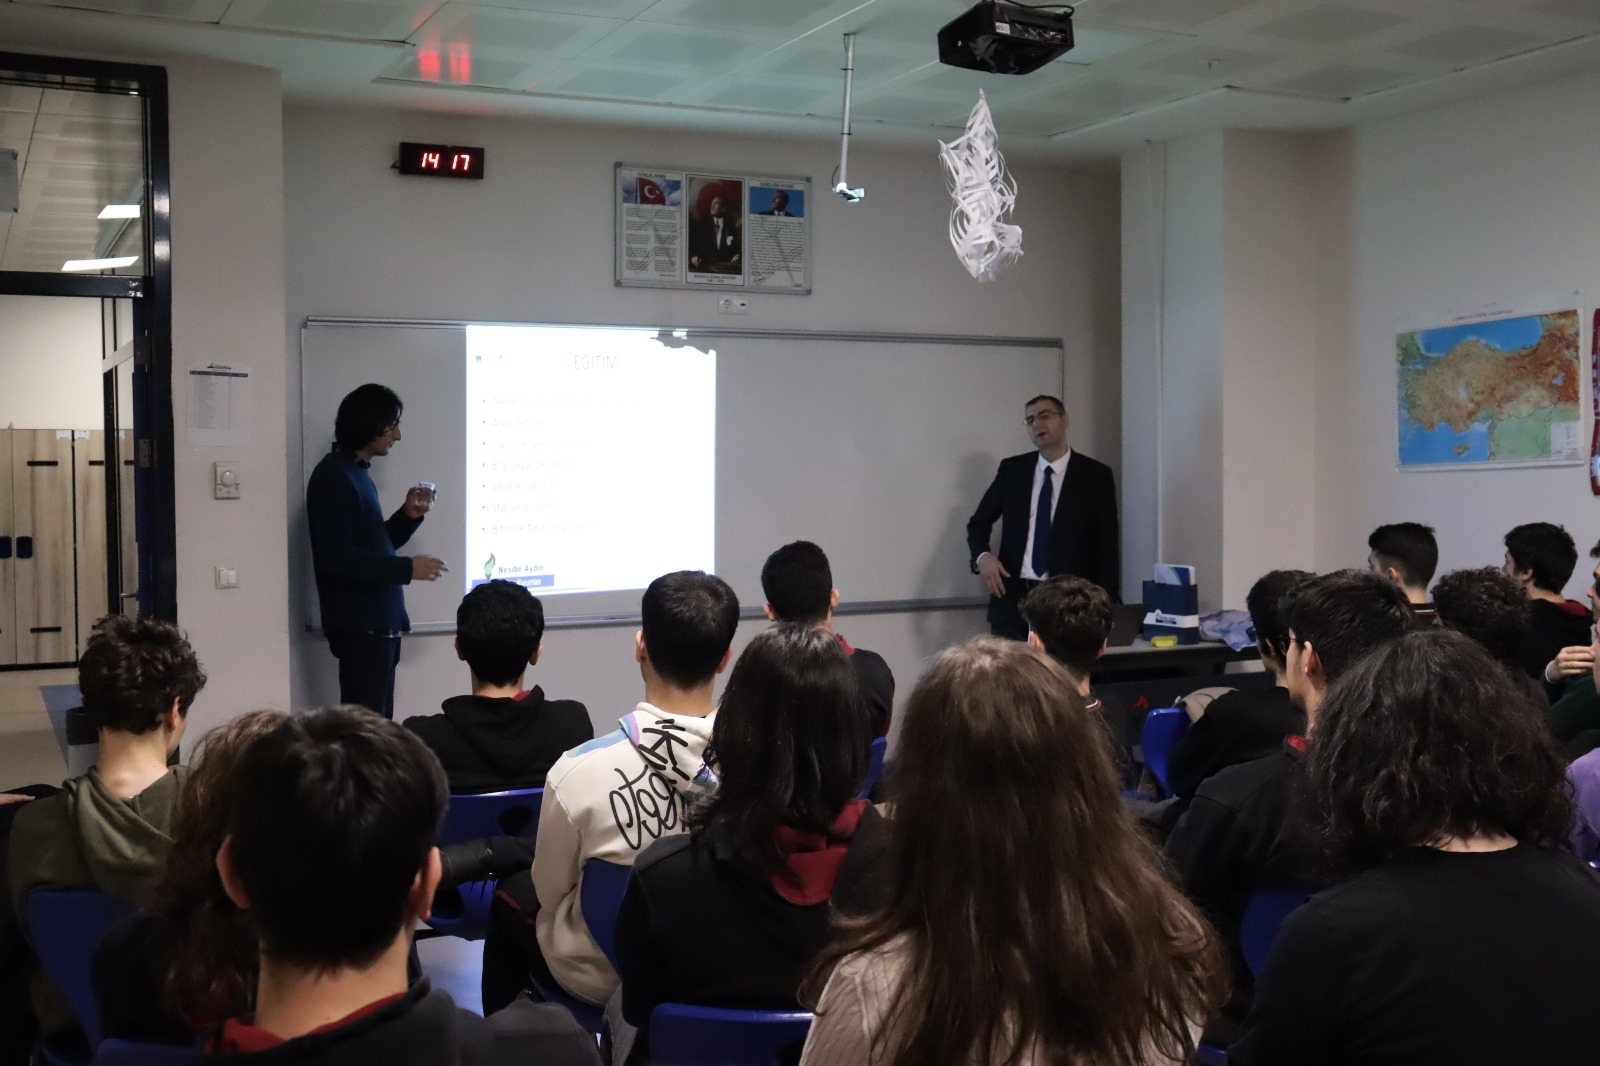 Our Staff Members Gave a Seminar on the Profession of Aerospace Engineer